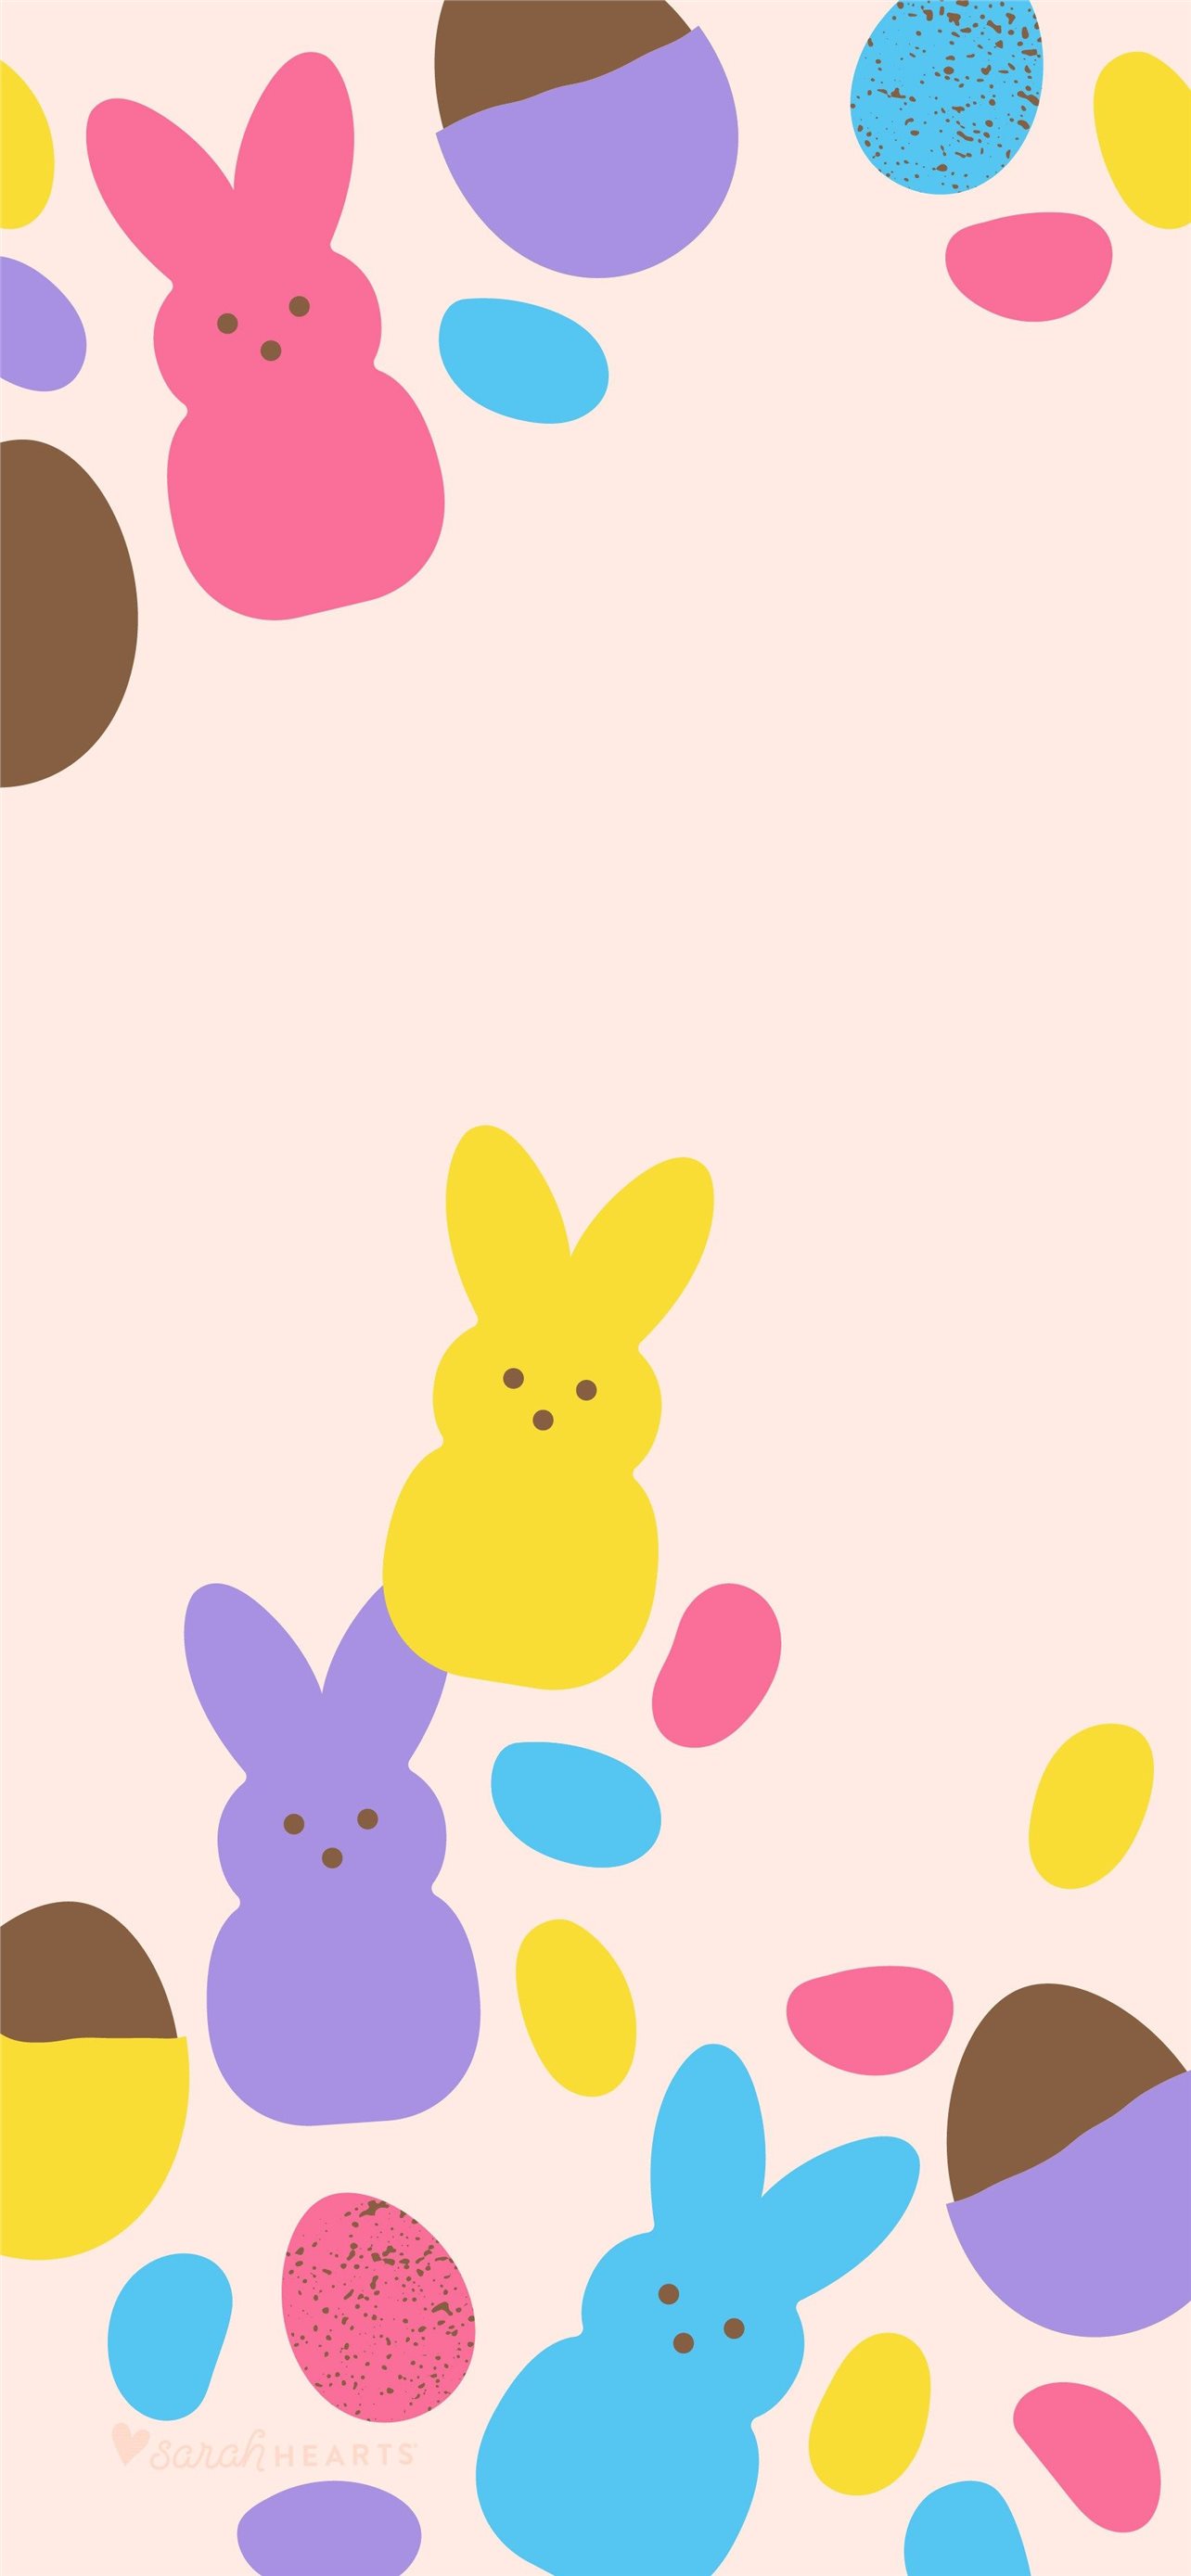 0 Cute Easter Iphone Background s  Wallpaperscom